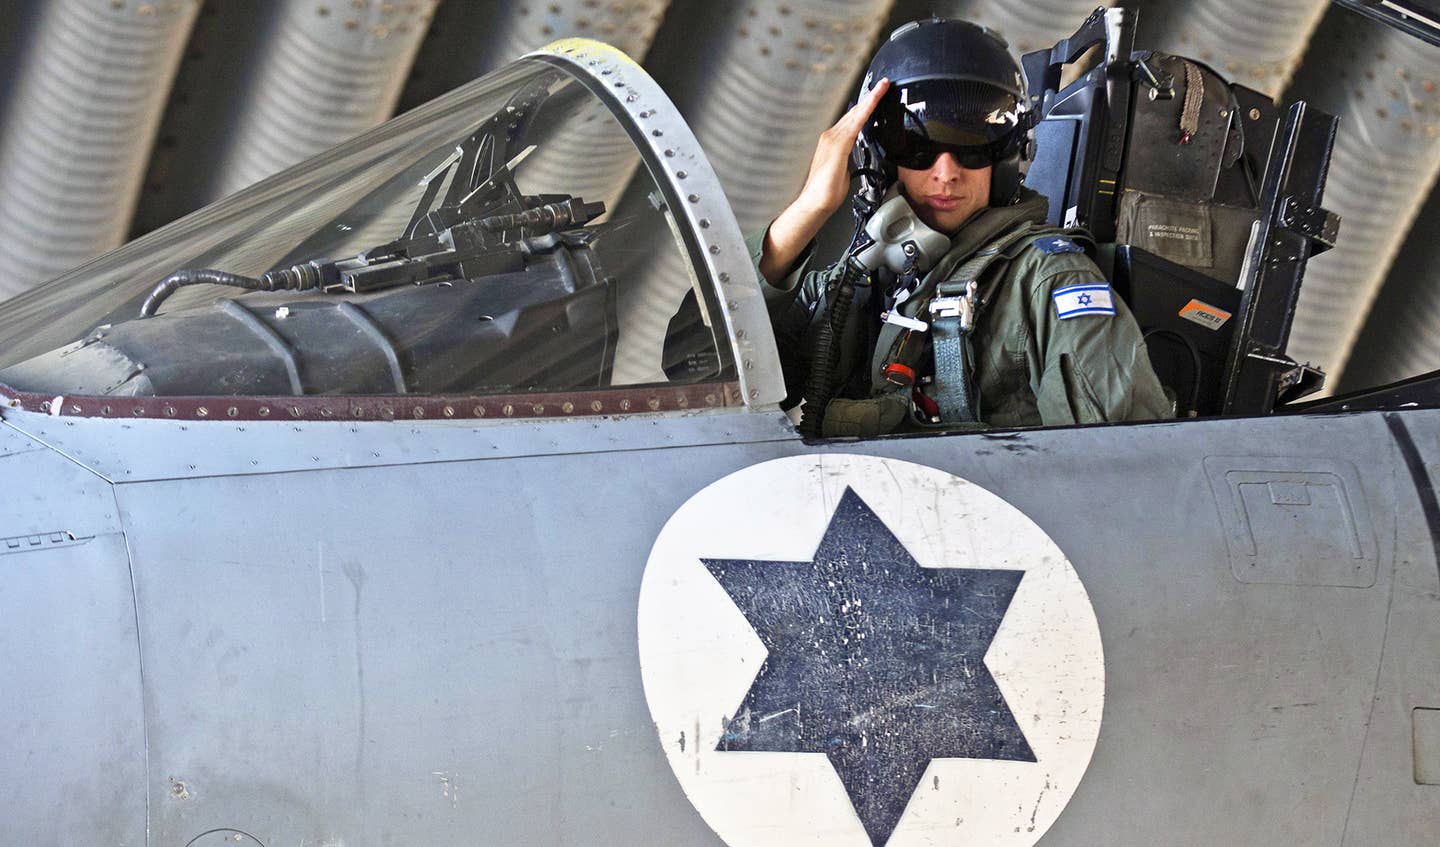 Israel to Receive More Second-Hand F-15 Eagles in Massive New Aid Package